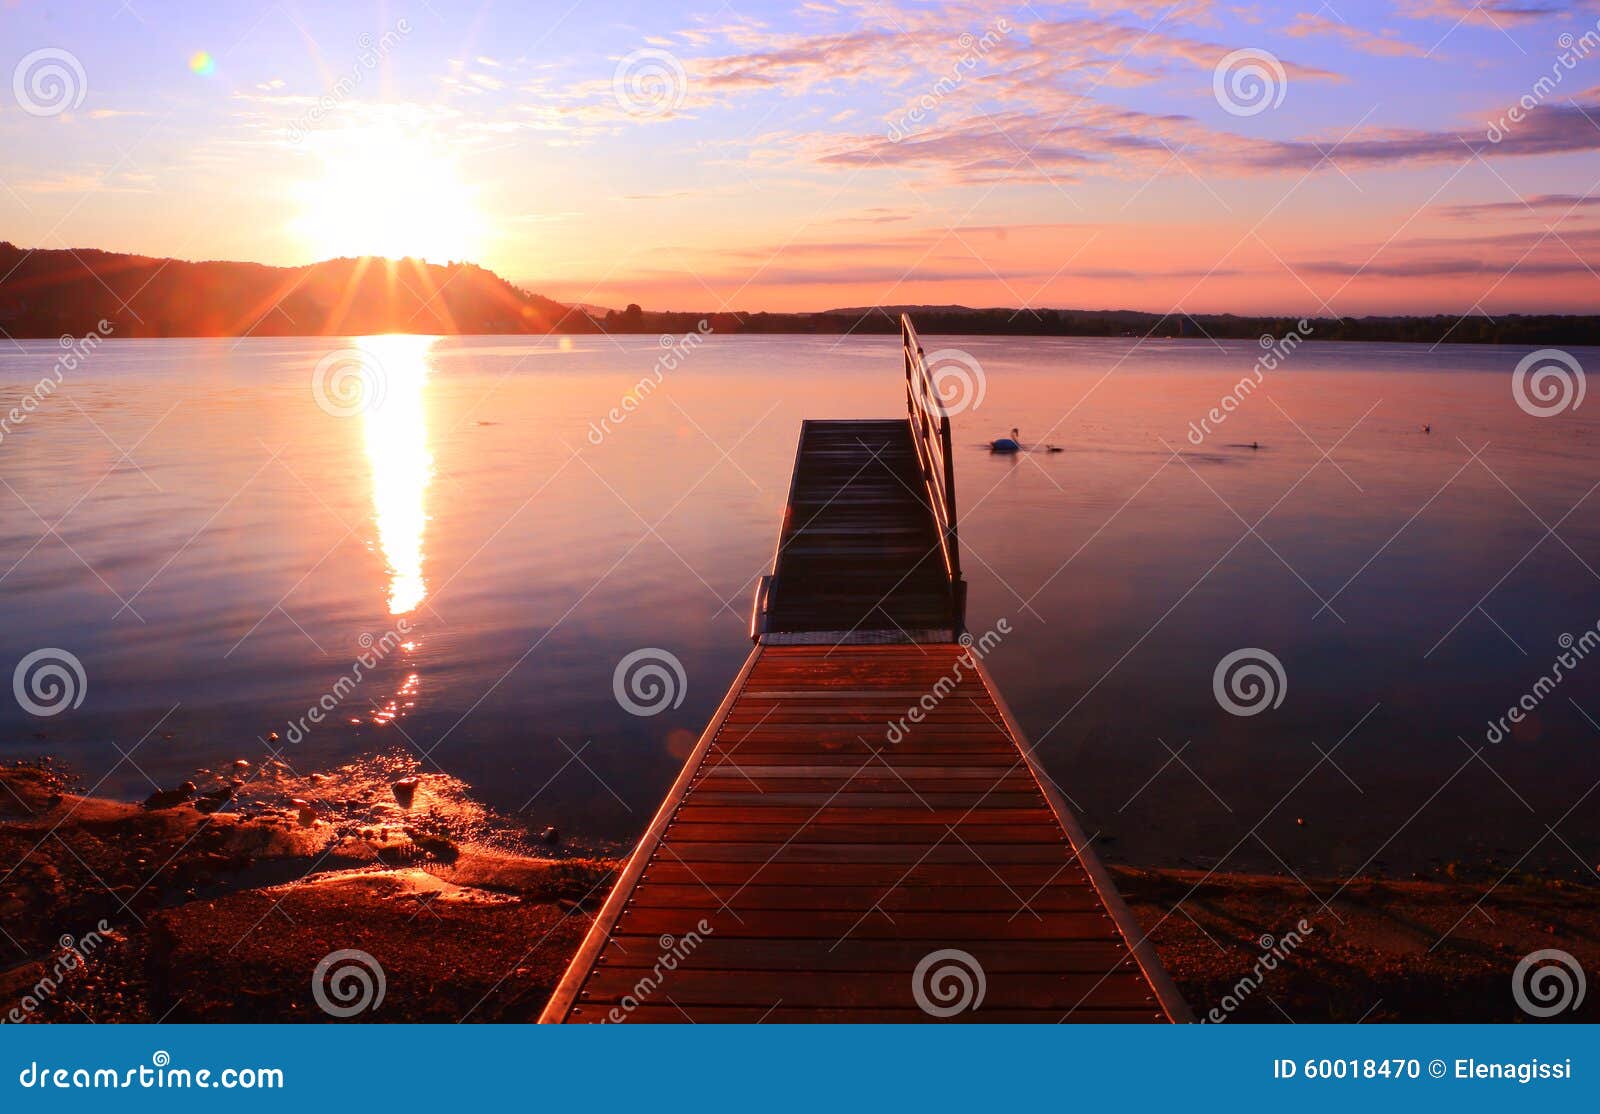 sunrise by a lake inspiring relax and quietness